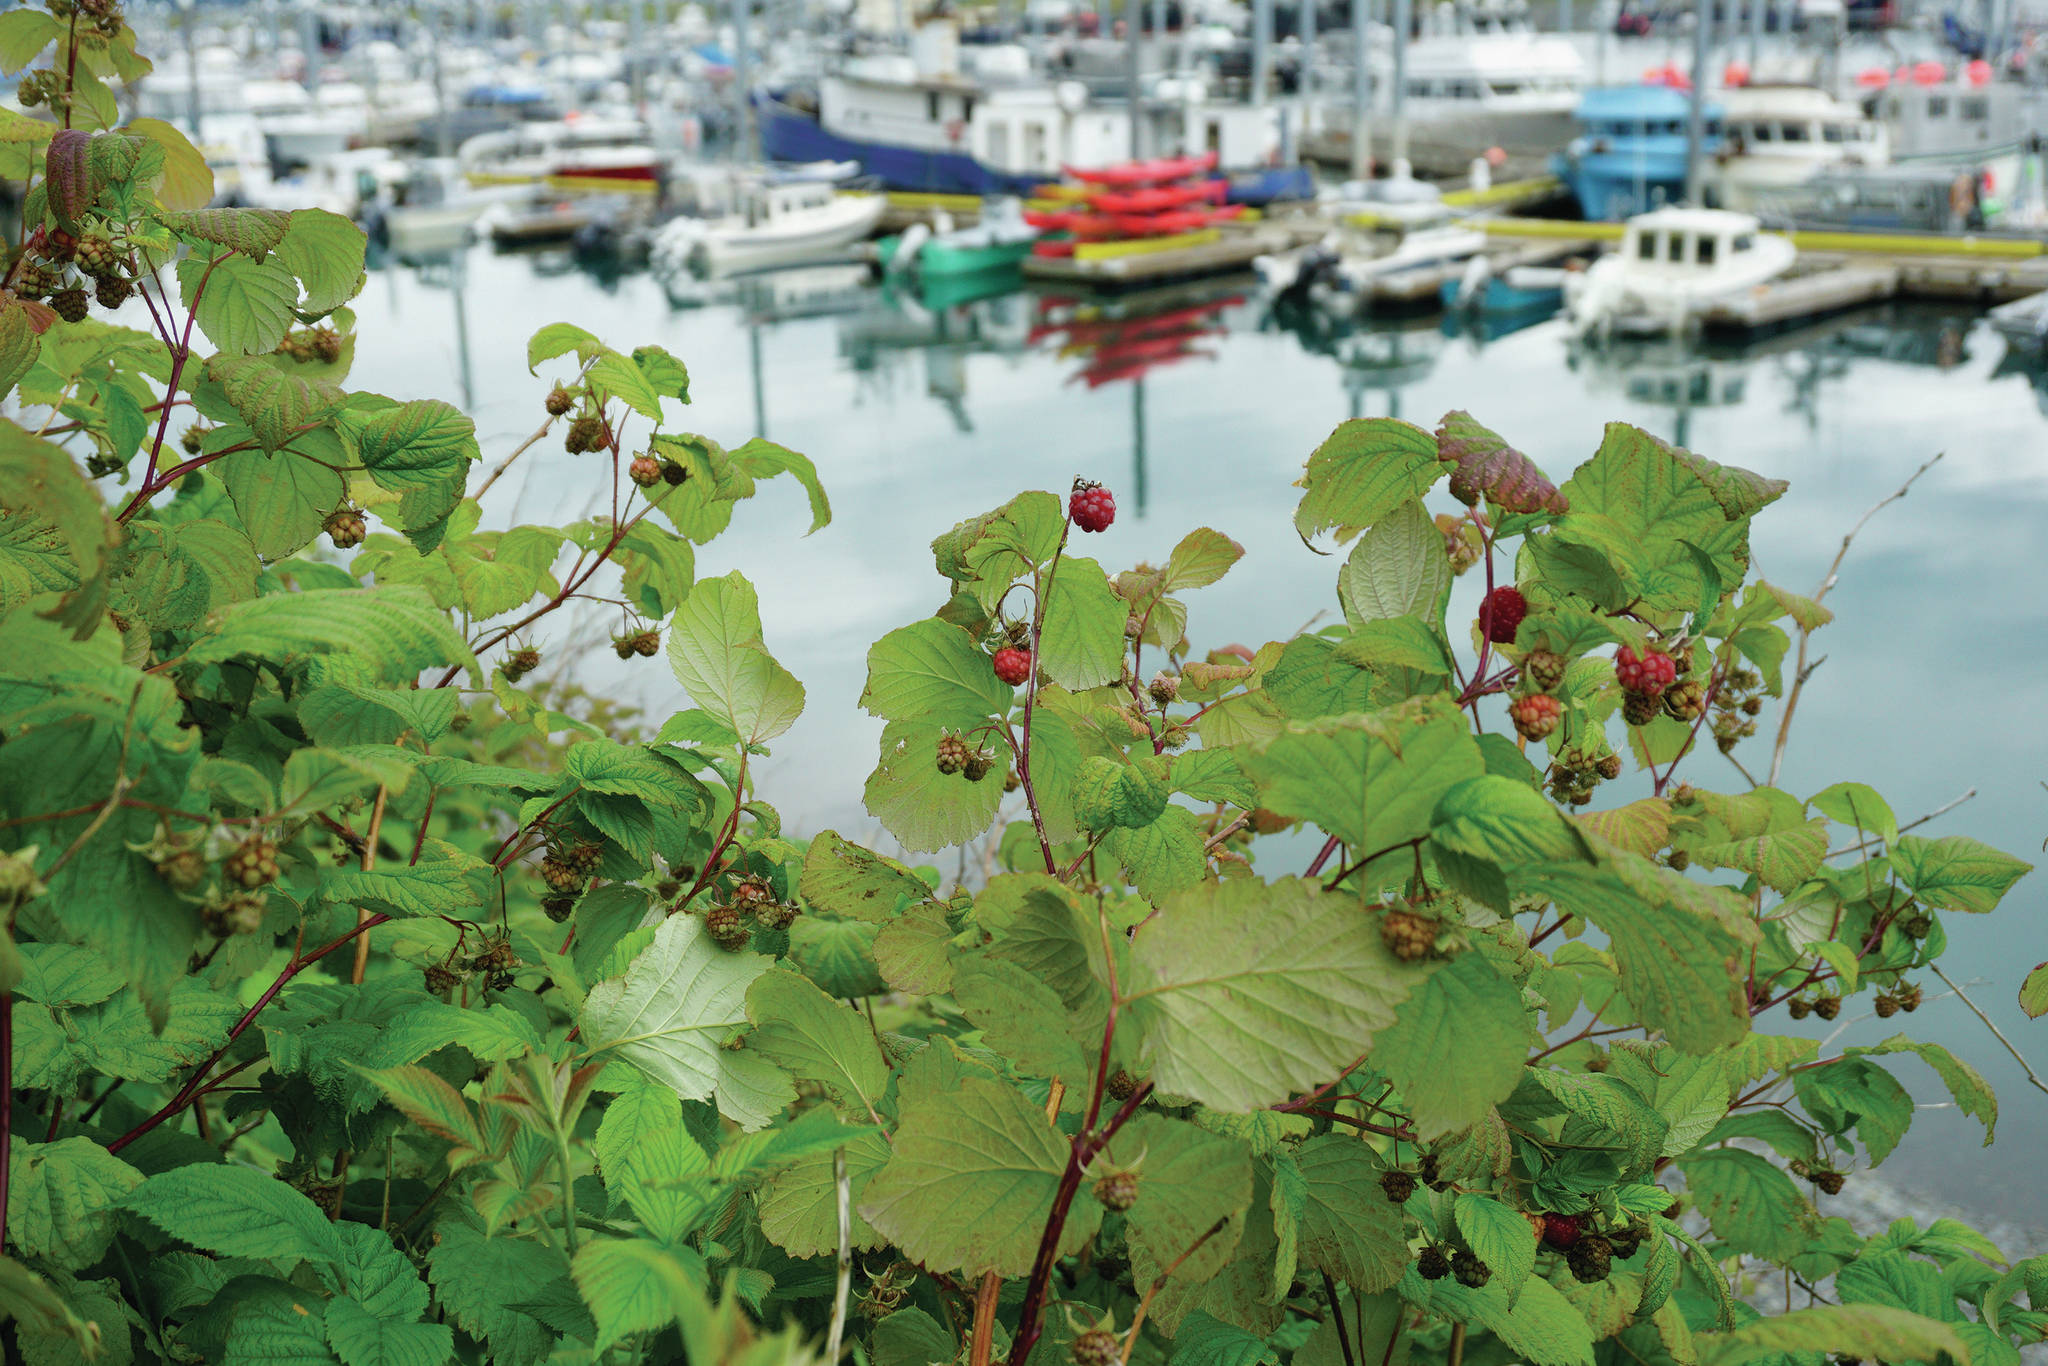 Rasperries are almost ripe on a bush on Aug. 3, 2020, at the Homer Harbor in Homer, Alaska. (Photo by Michael Armstrong/Homer News)